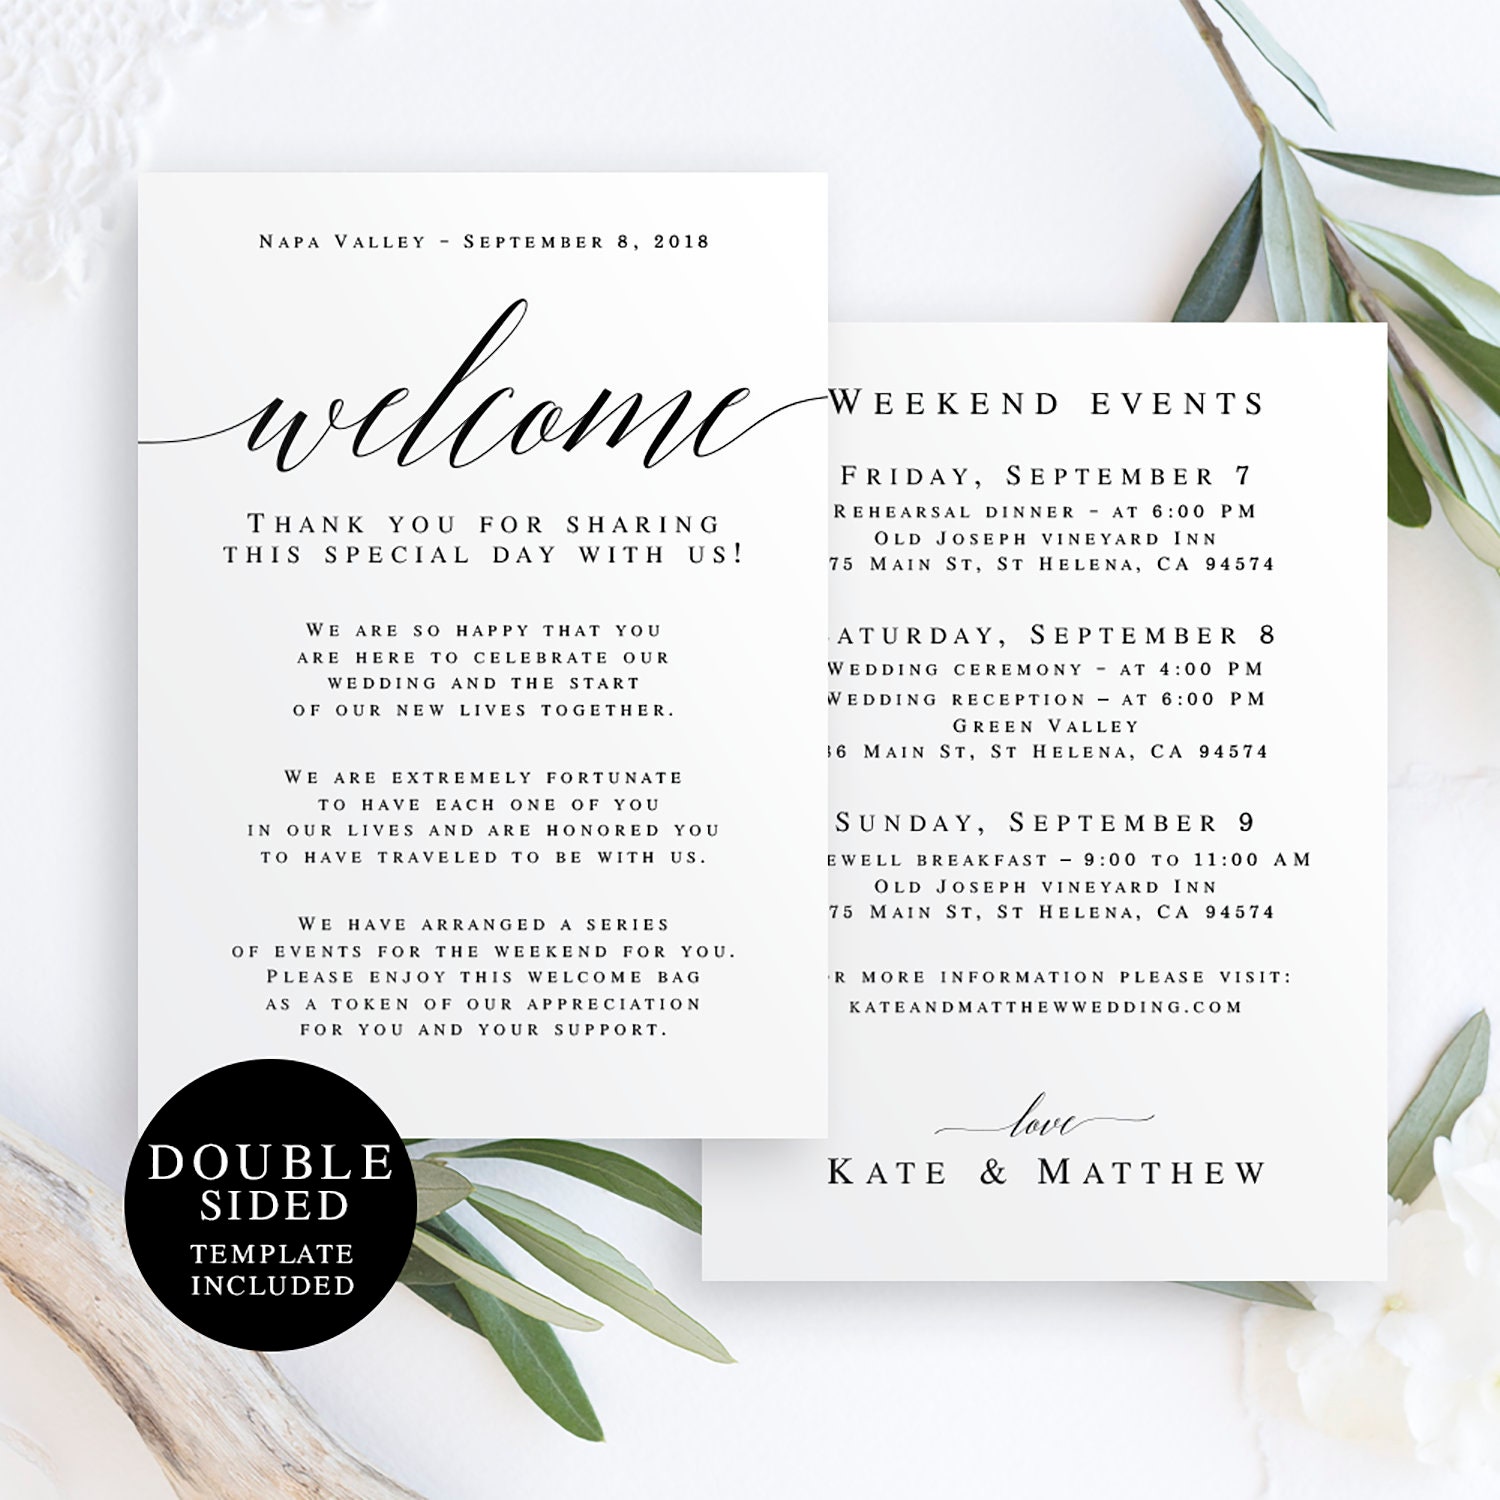 Welcome Bag Letter, Wedding Itinerary, Agenda, Welcome Bag Note, Wedding  Thank You, Instant Download, Editable Template, Digital #022-102WB